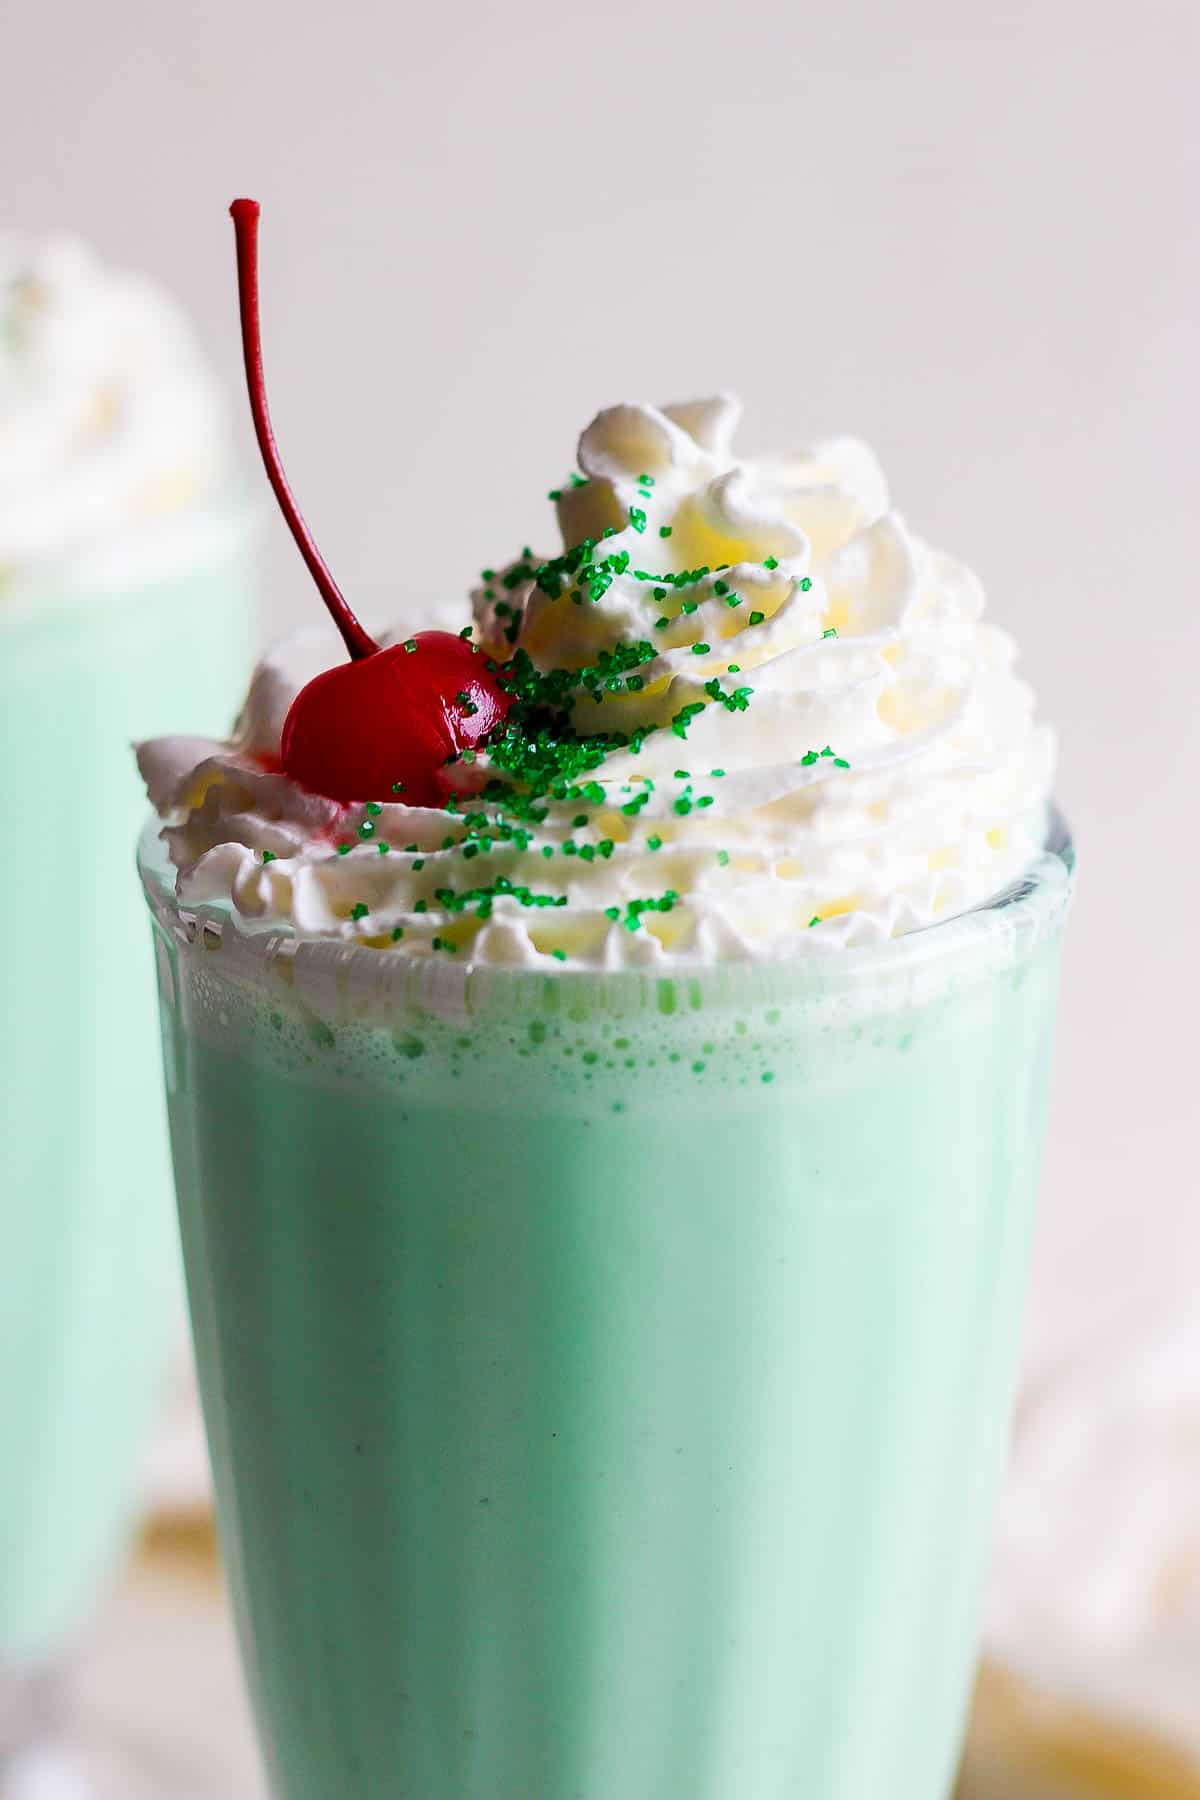 A shamrock shake topped with whipped cream, green sprinkles, and a cherry.